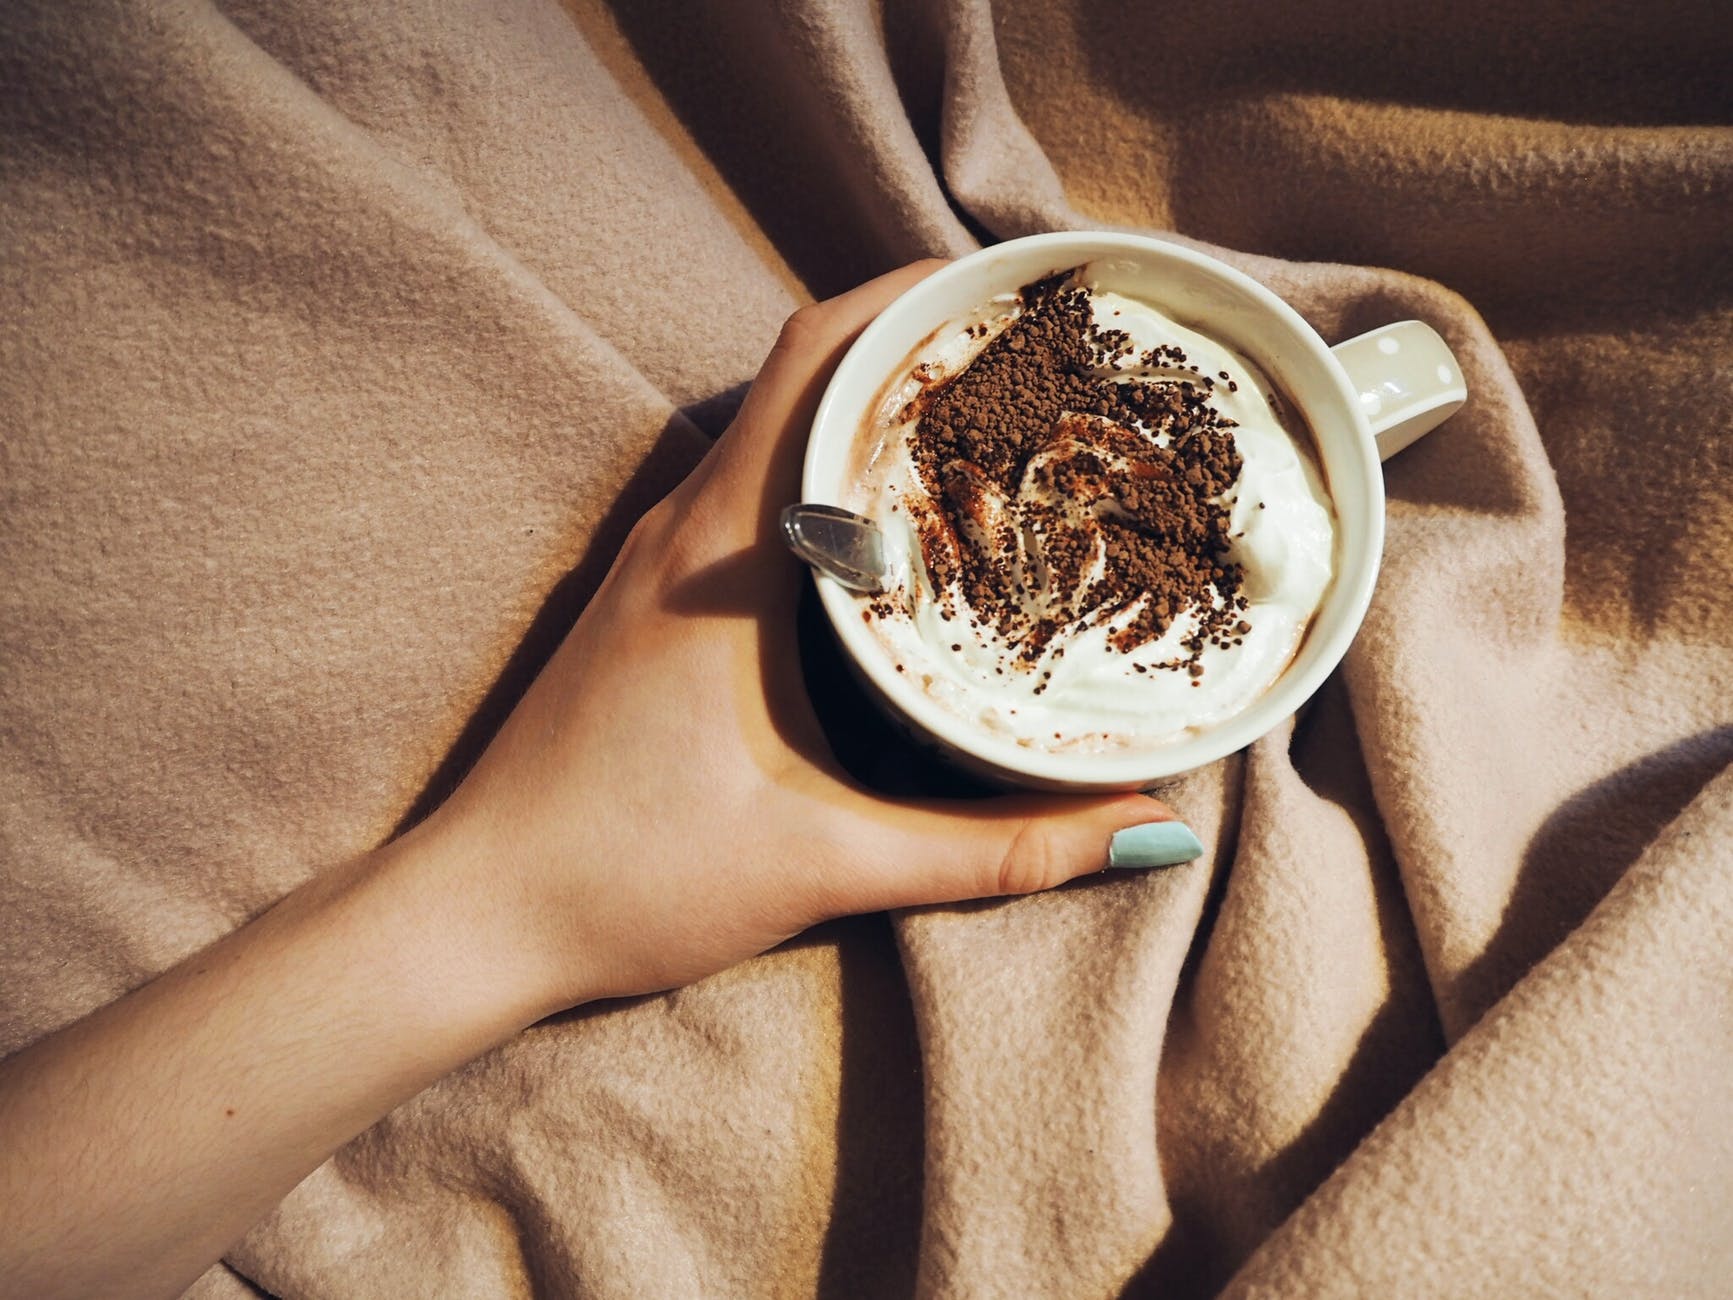 A person tucked up under a blanket holding a hot chocolate